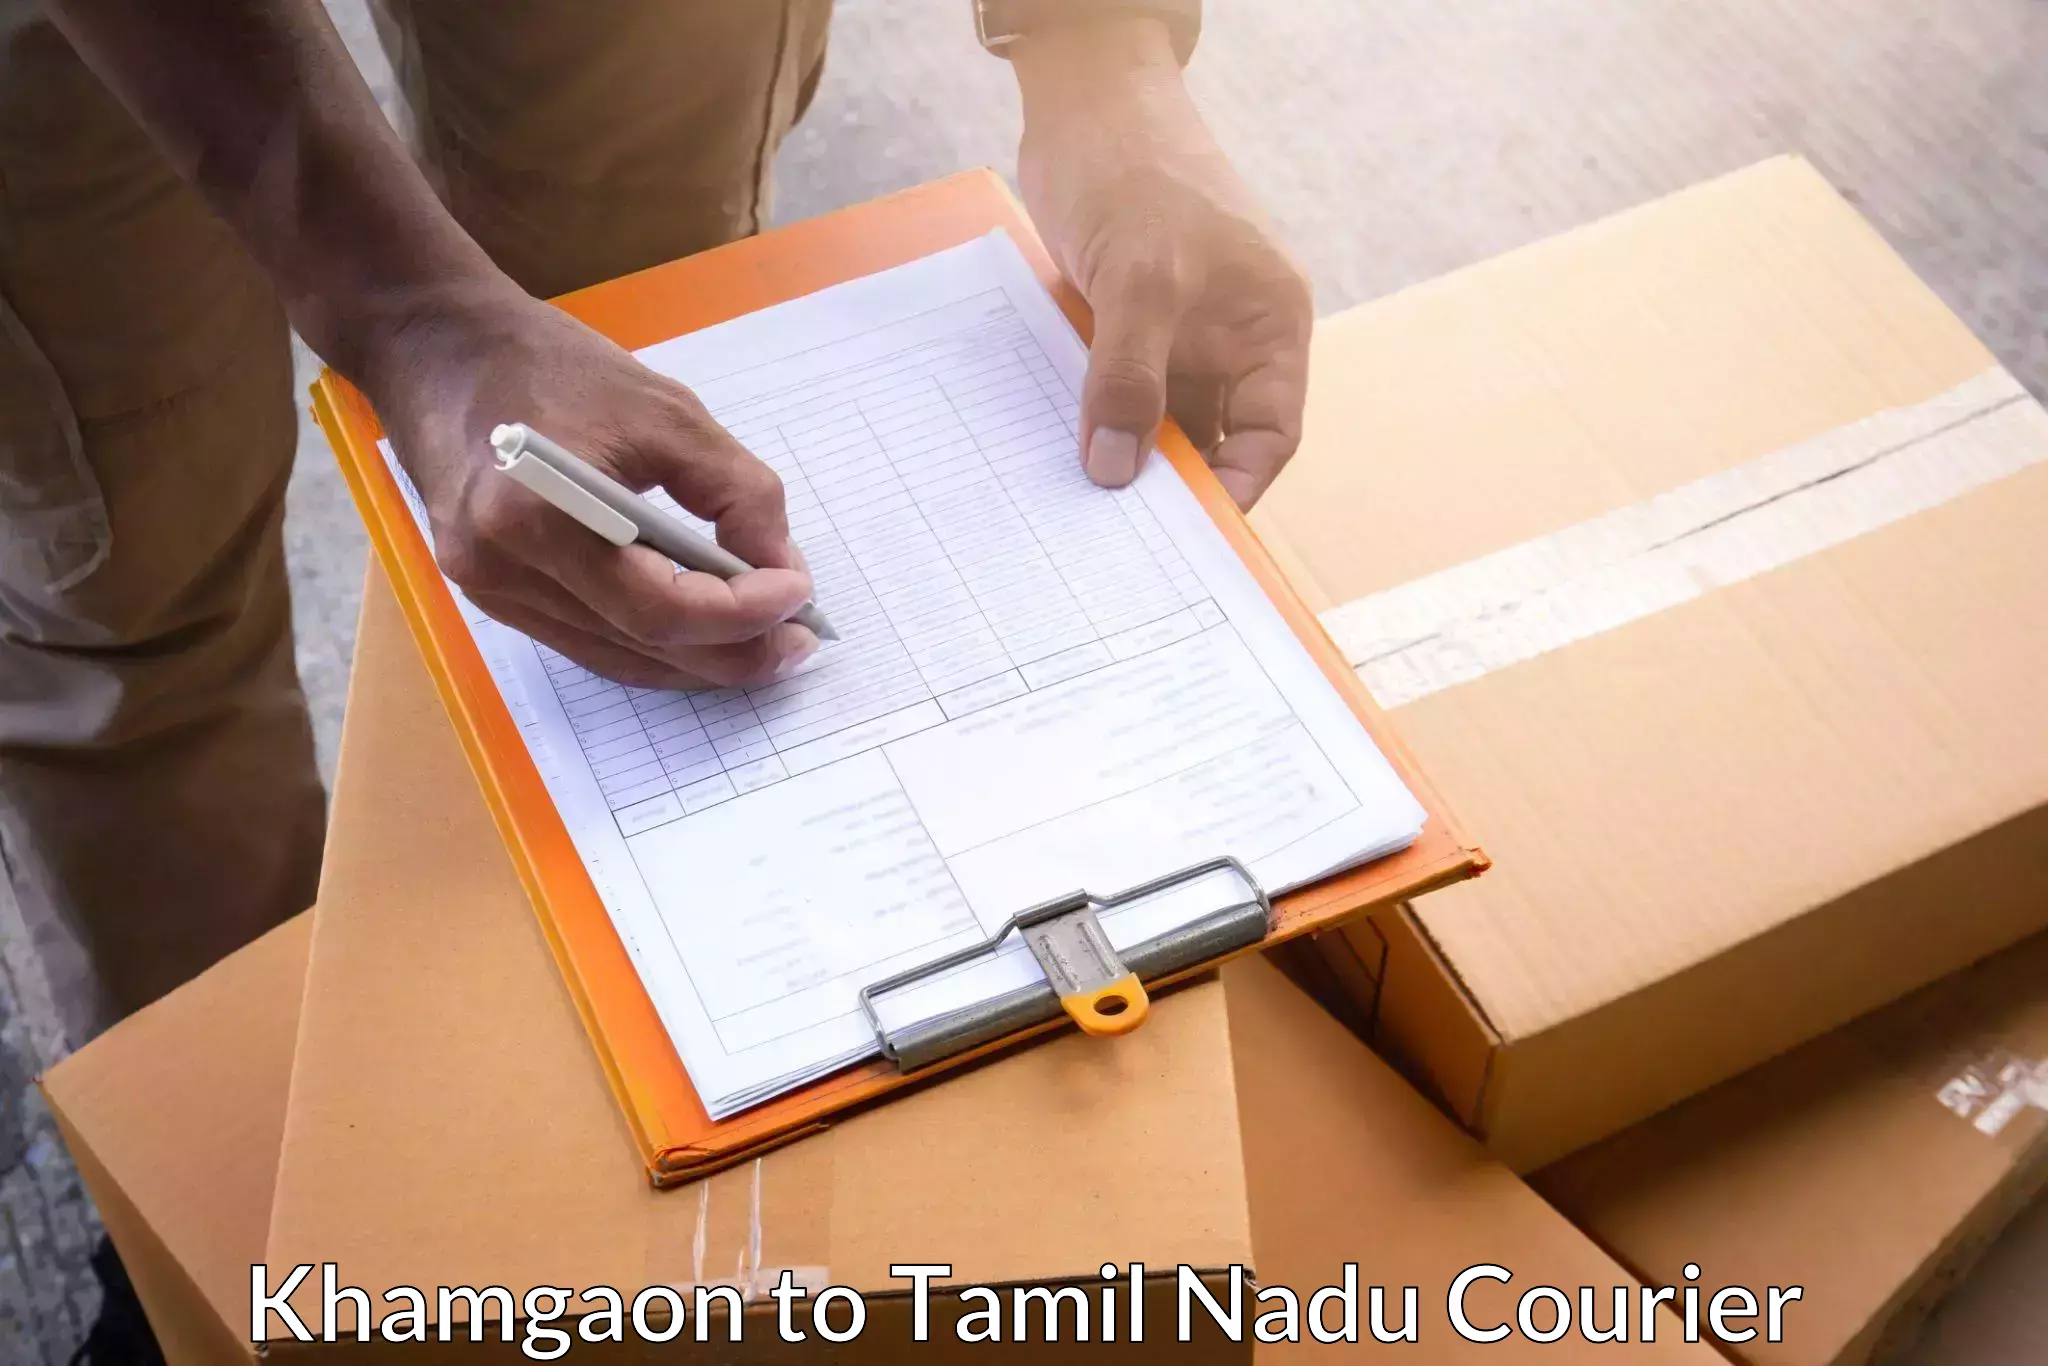 Efficient cargo services Khamgaon to Vellore Institute of Technology